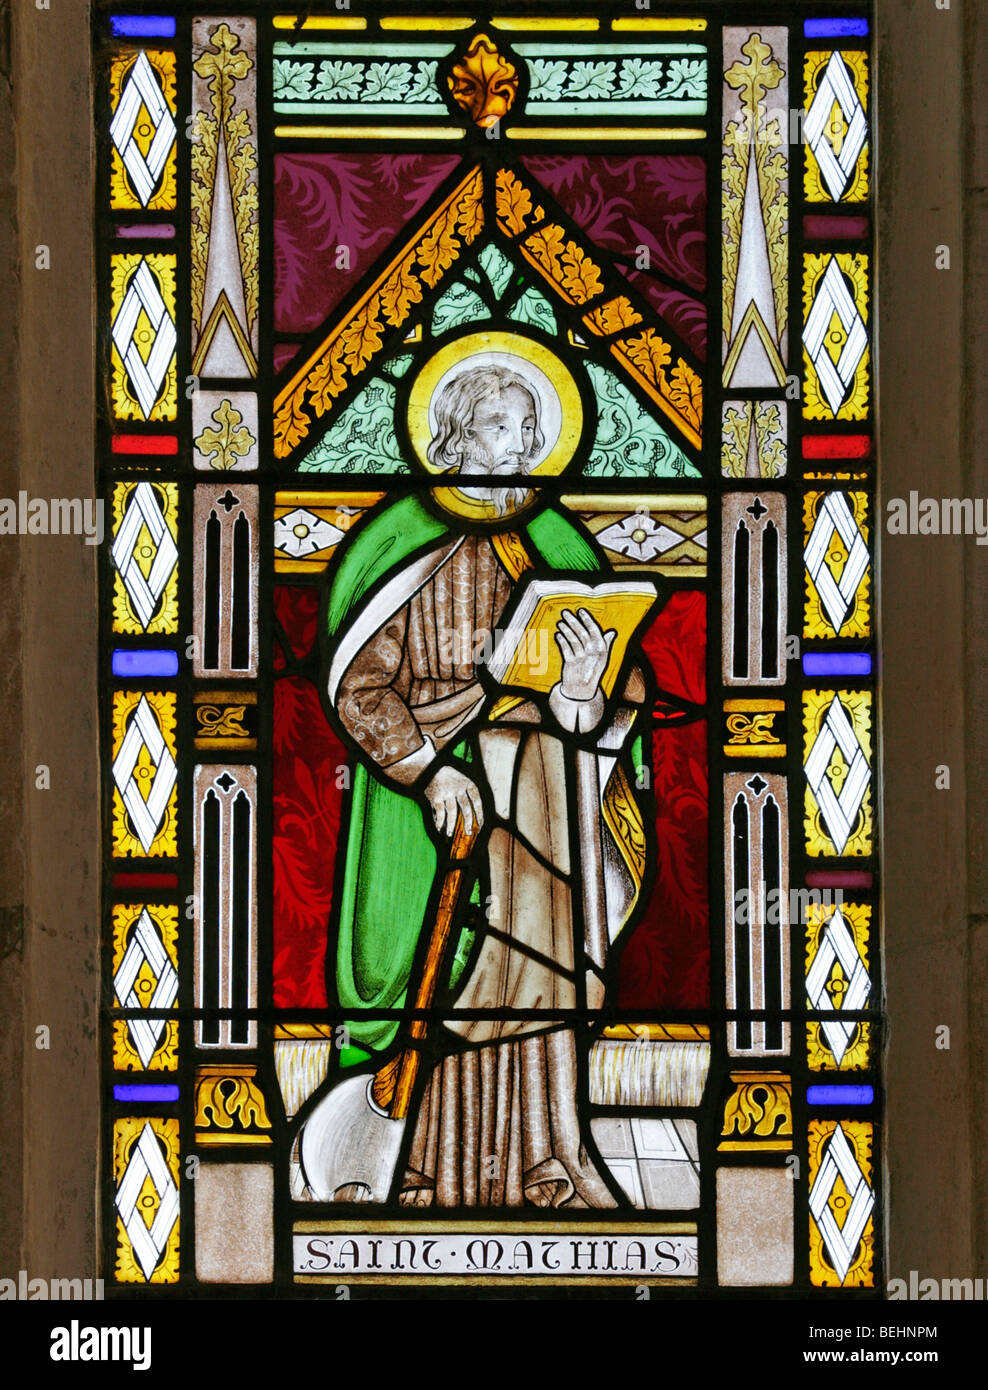 A stained glass window depicting St Mathias or Matthias the Apostle, All Saints Church, Wighton, Norfolk by Joseph Grant of Costessey Stock Photo